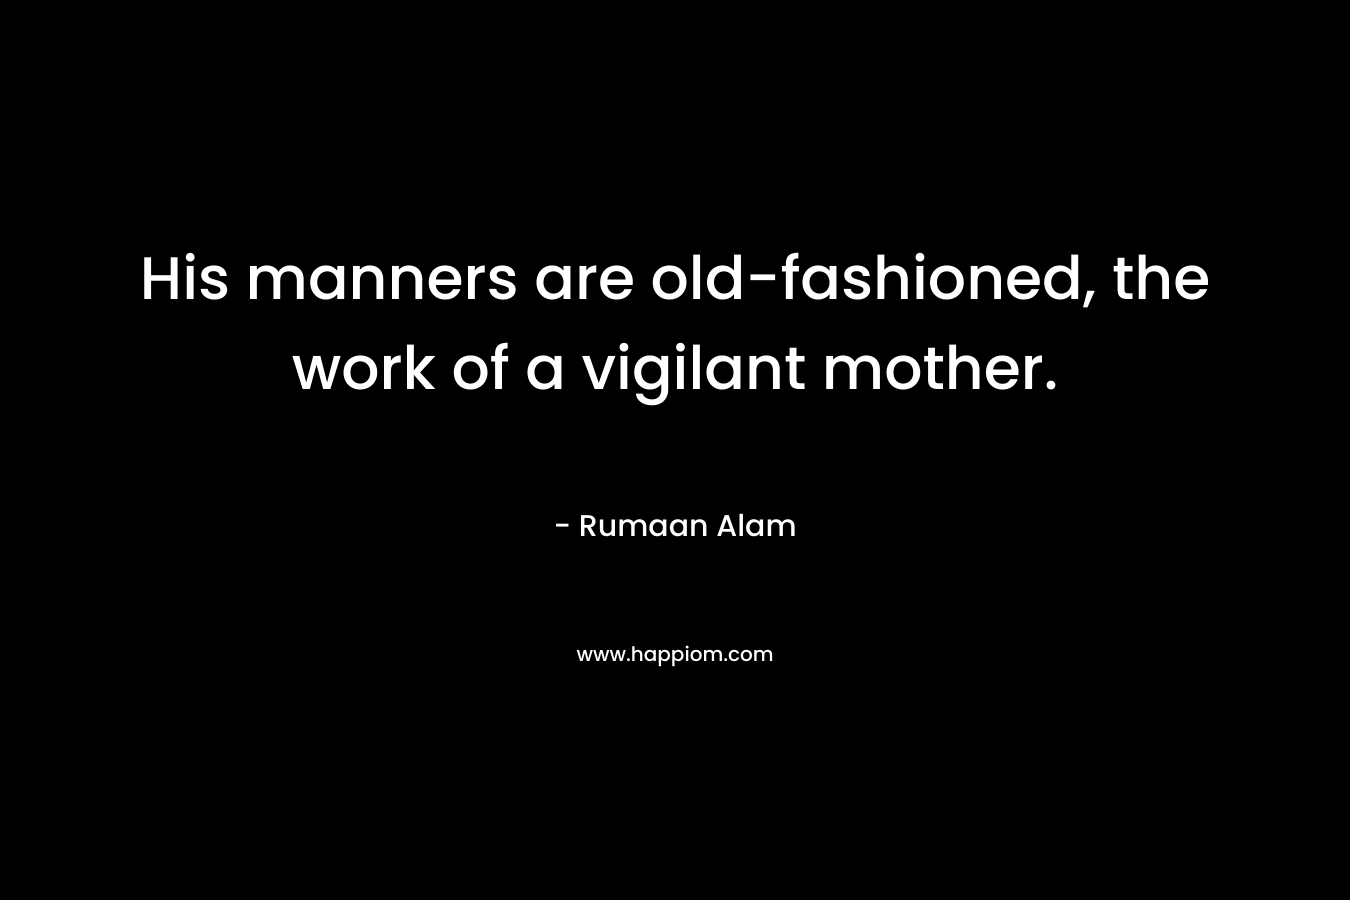 His manners are old-fashioned, the work of a vigilant mother.